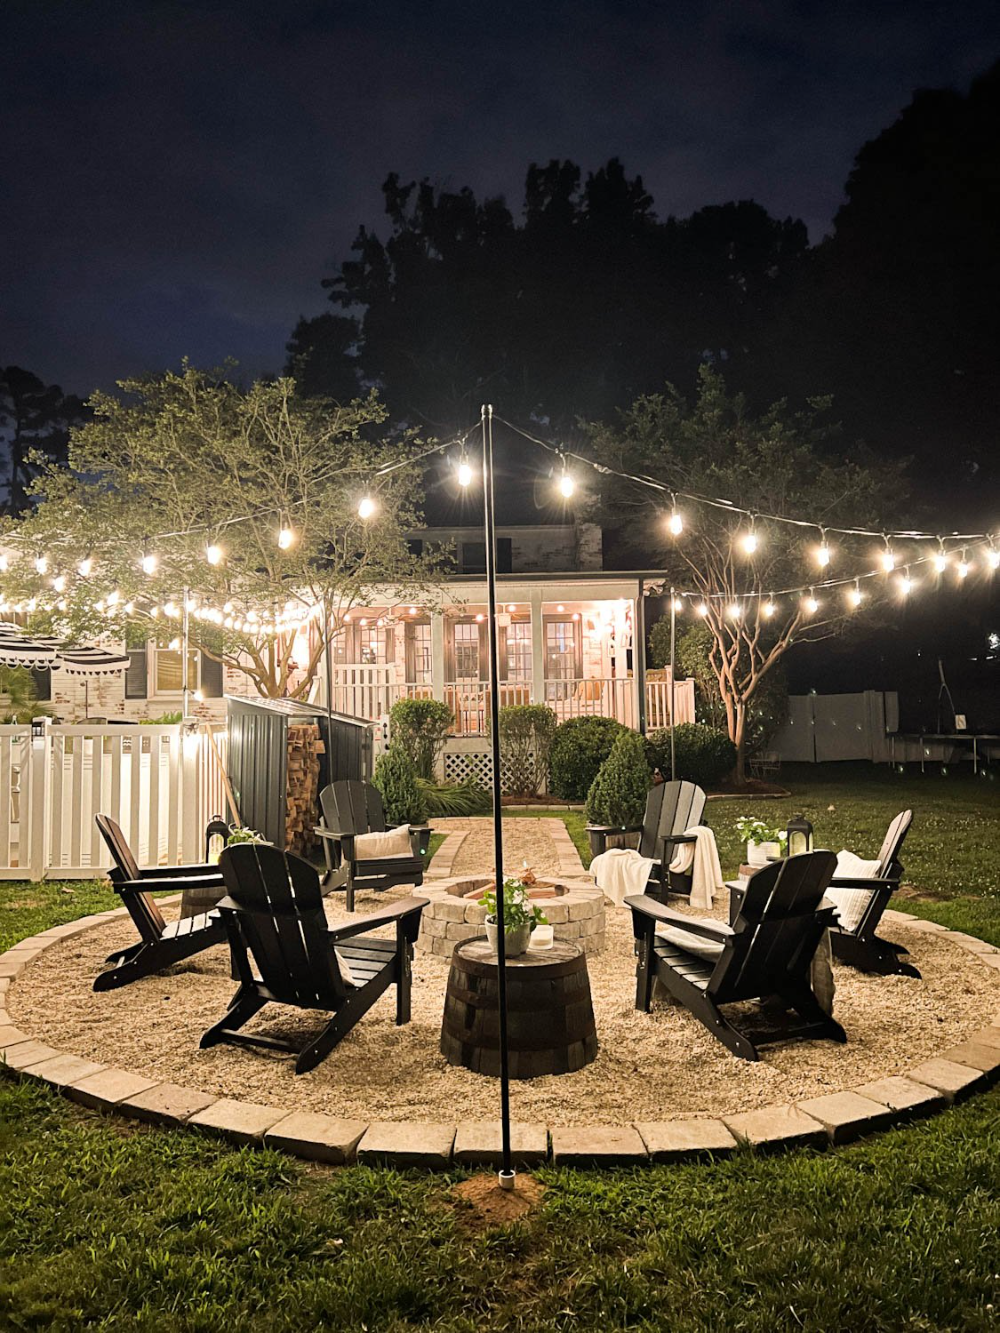 Illuminate Your Outdoor Space: The Magical Glow of Patio Lights